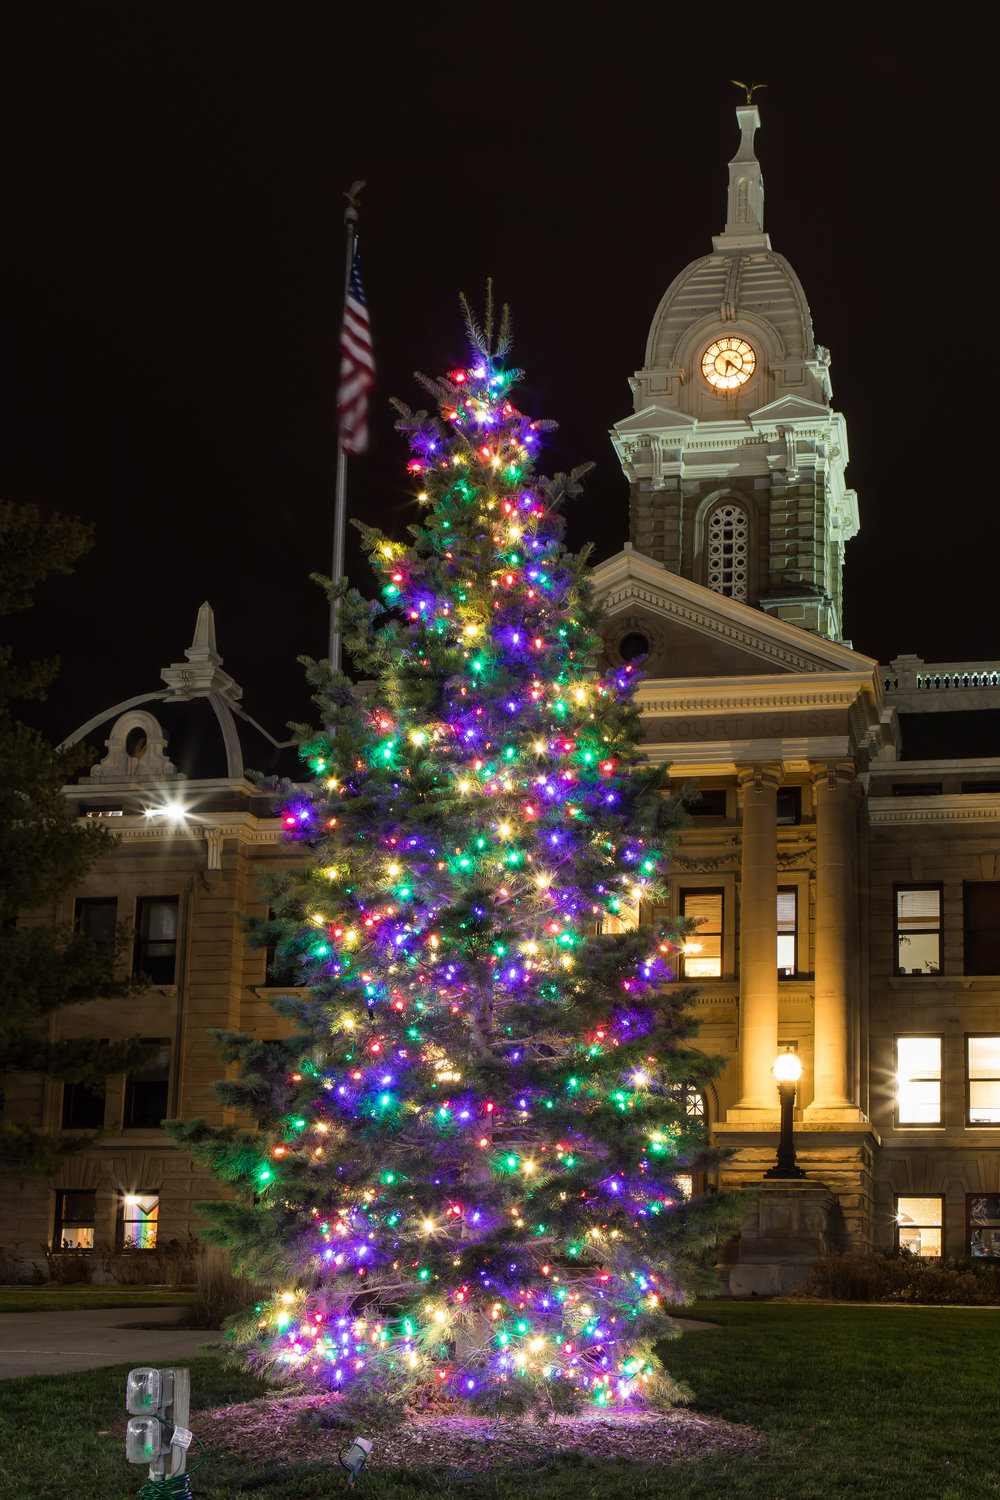 The 2022 Ingham County Christmas tree is located on the grounds of the Mason Historical Courthouse in Mason.